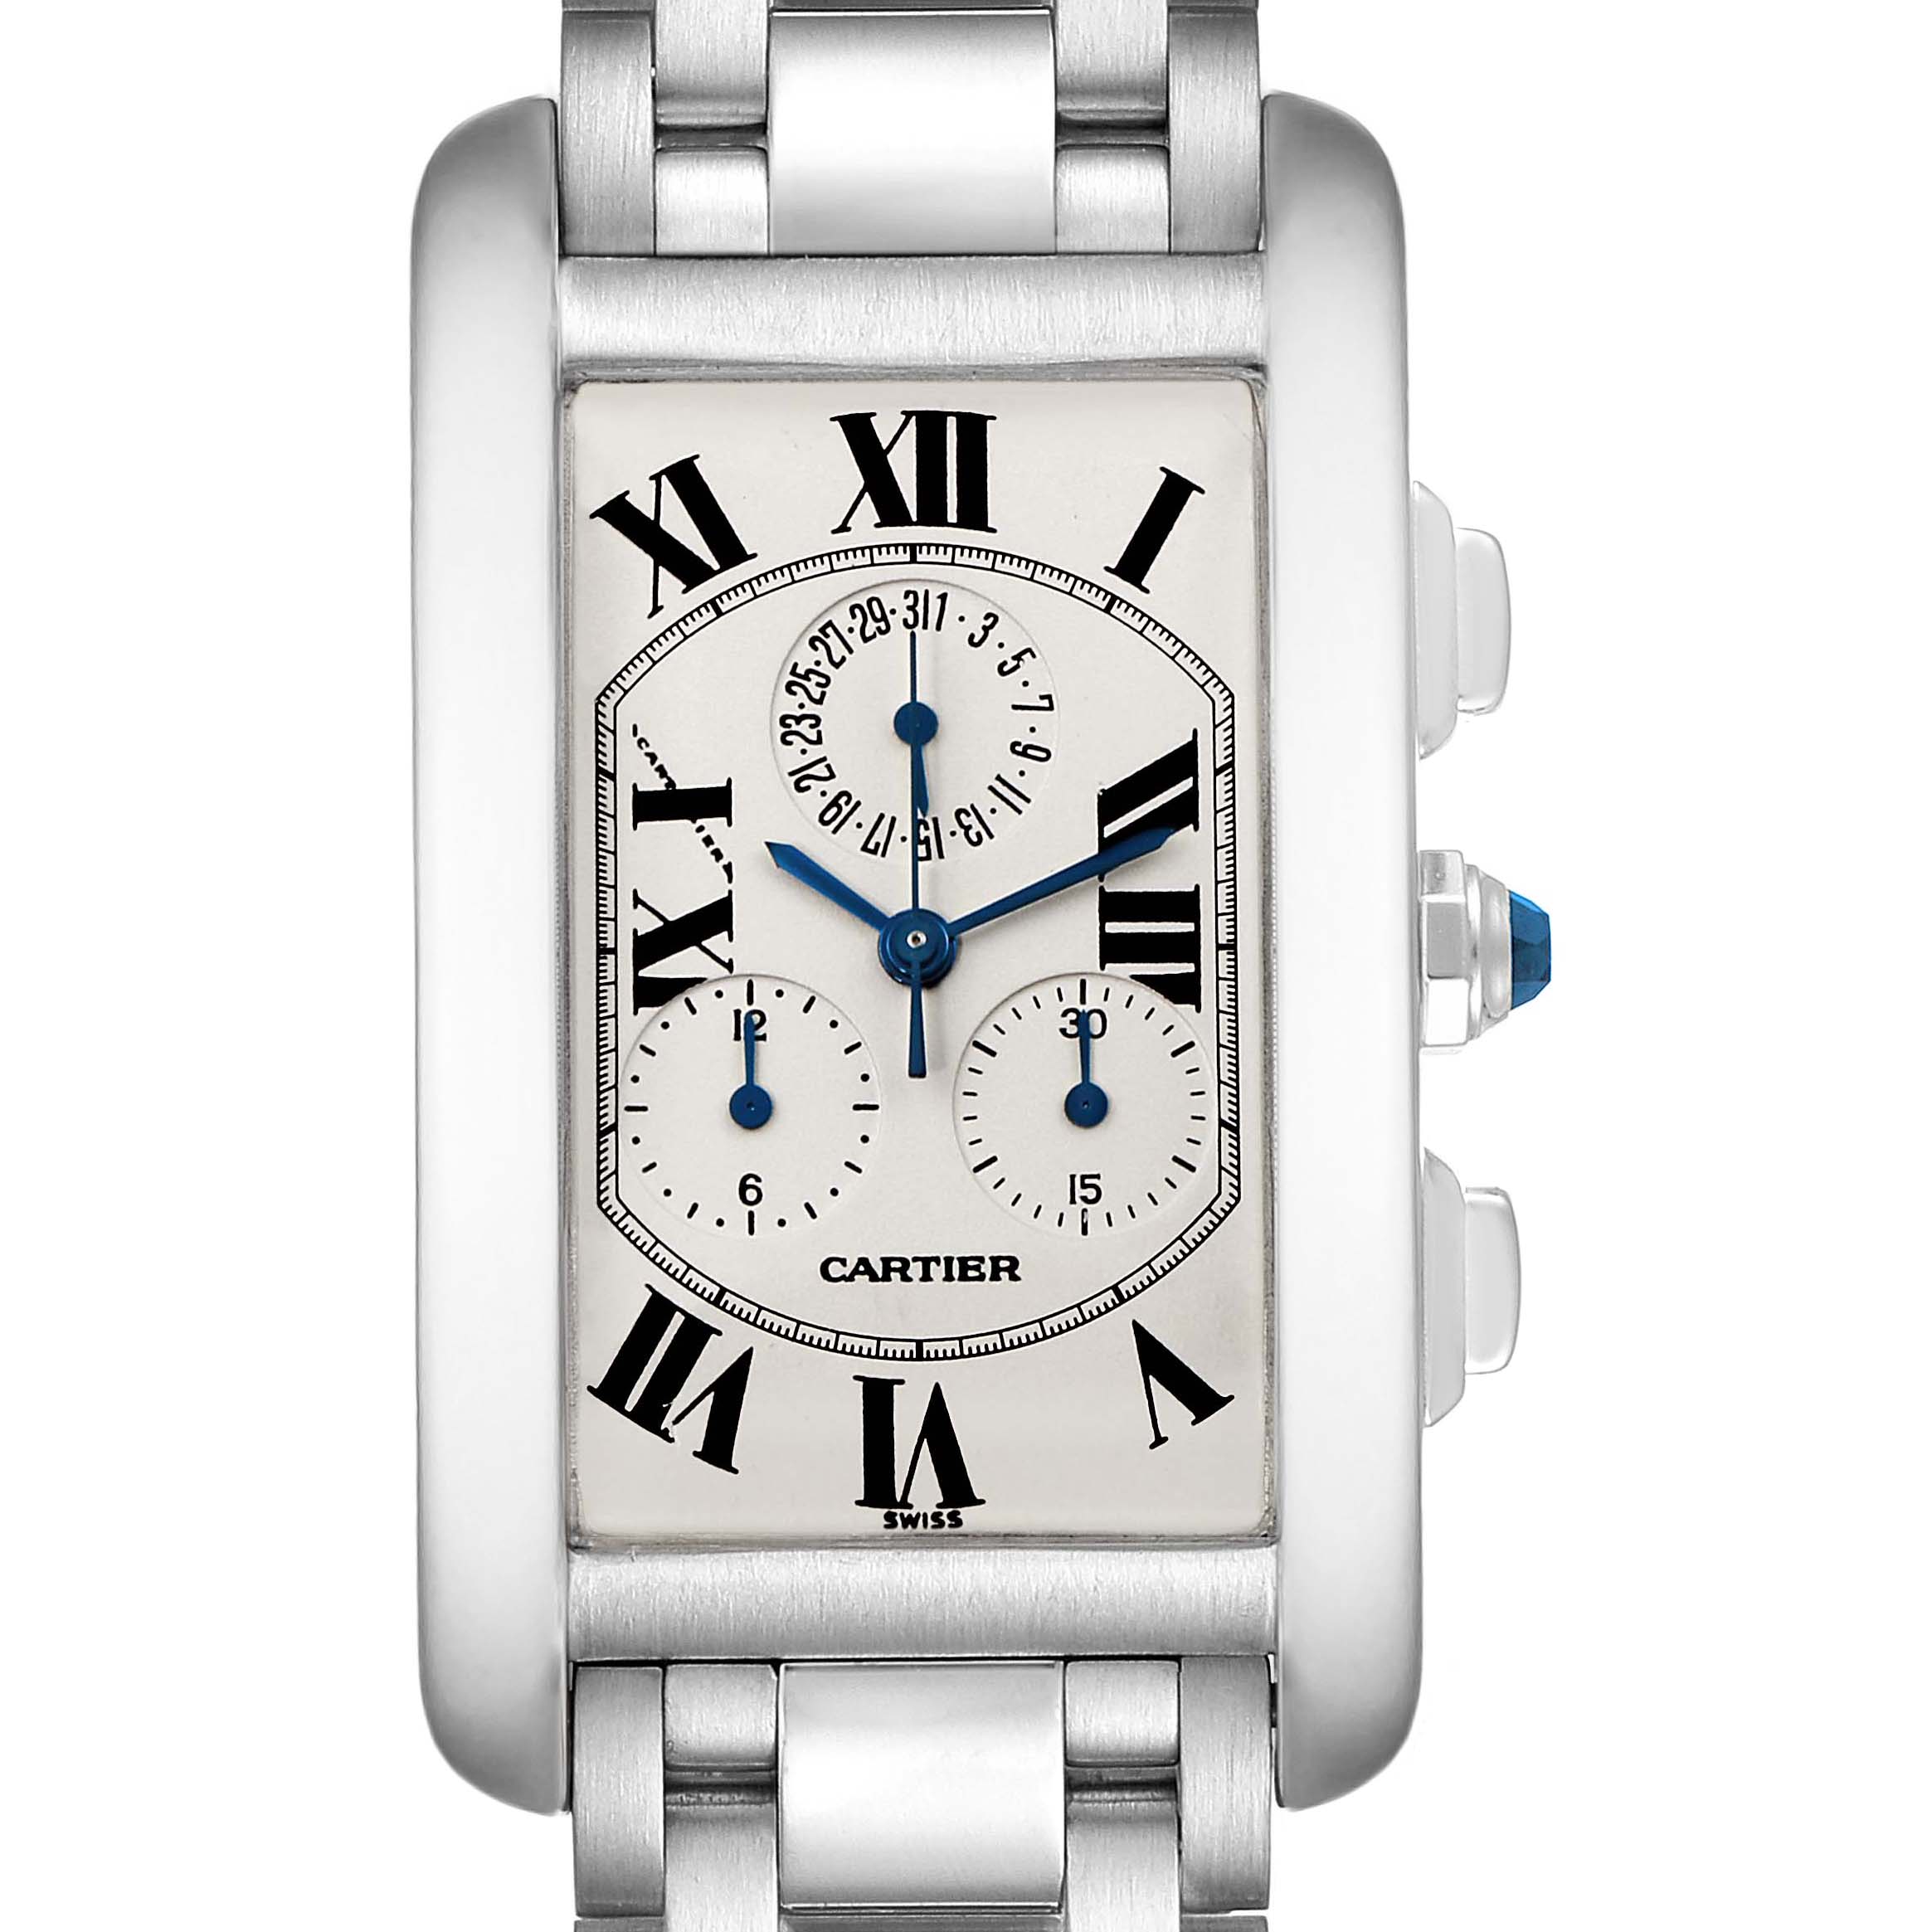 Cartier Tank Americaine Chronograph White Gold Mens Watch 